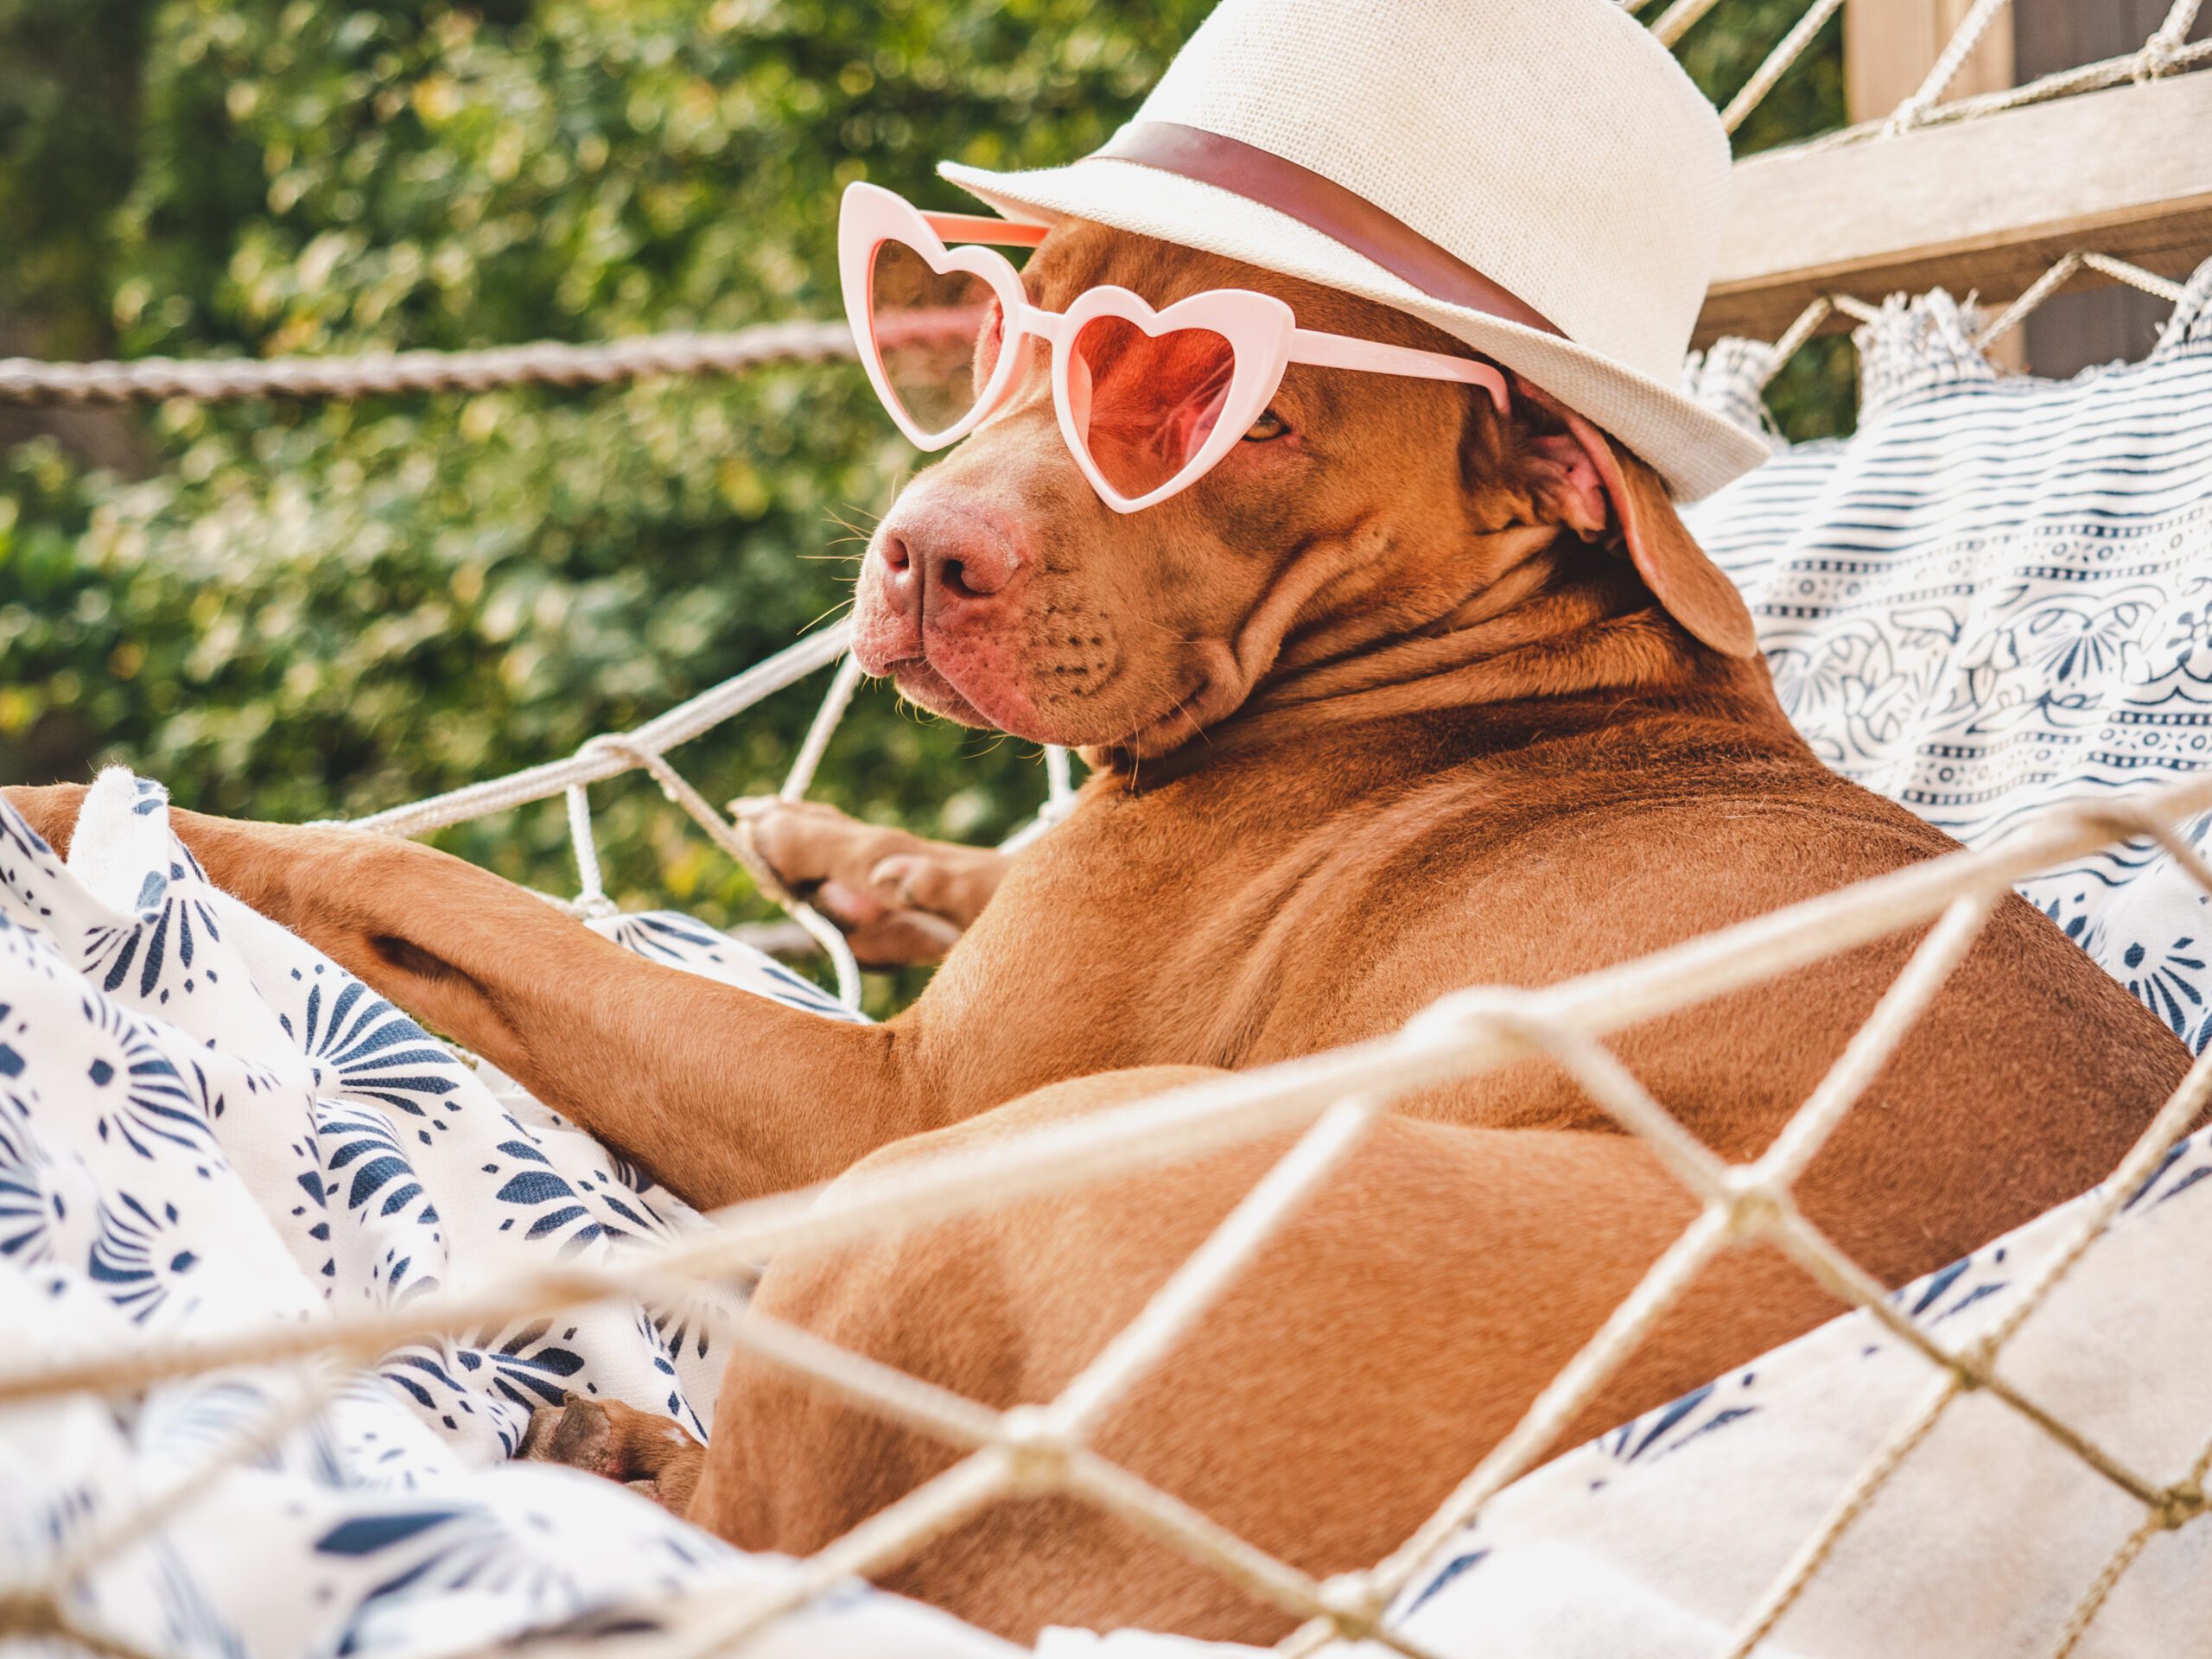 Is your dog a sun seeker? Do they love spending their days soaking up rays? It's important you find them some dog sunscreen!